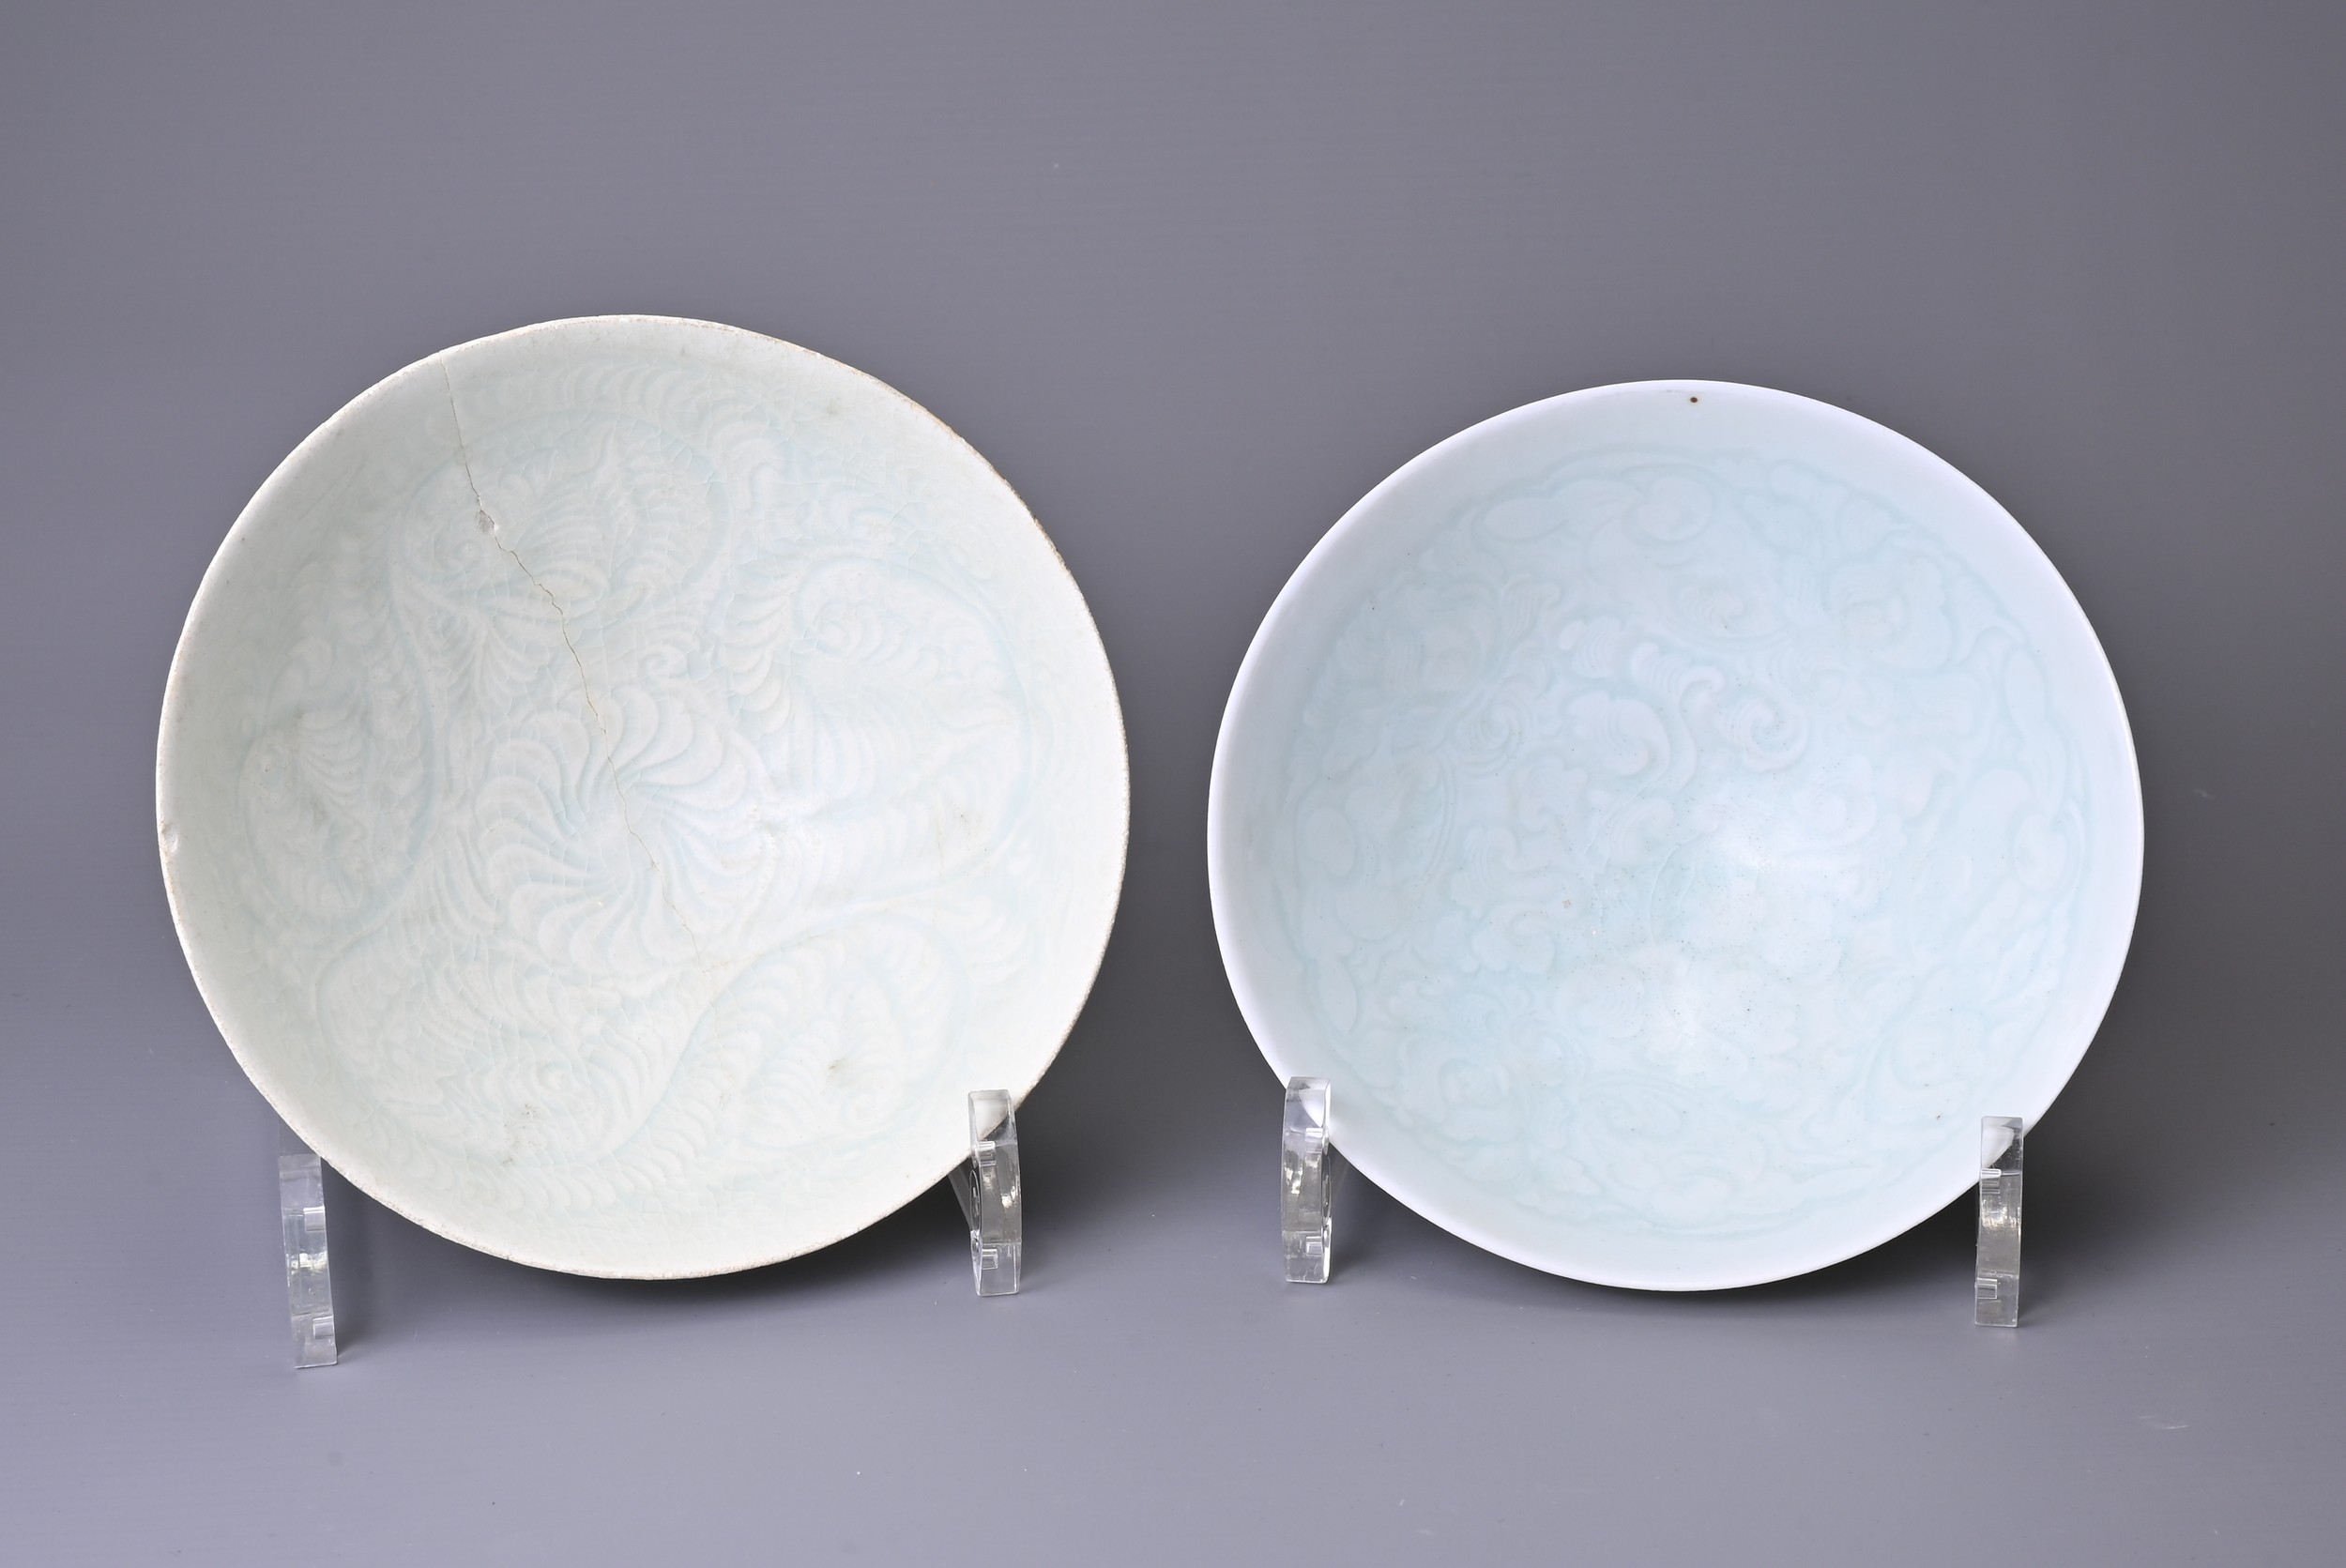 TWO CHINESE QINGBAI PORCELAIN BOWLS, SONG DYNASTY (960-1279). One with central chrysanthemum - Image 5 of 6